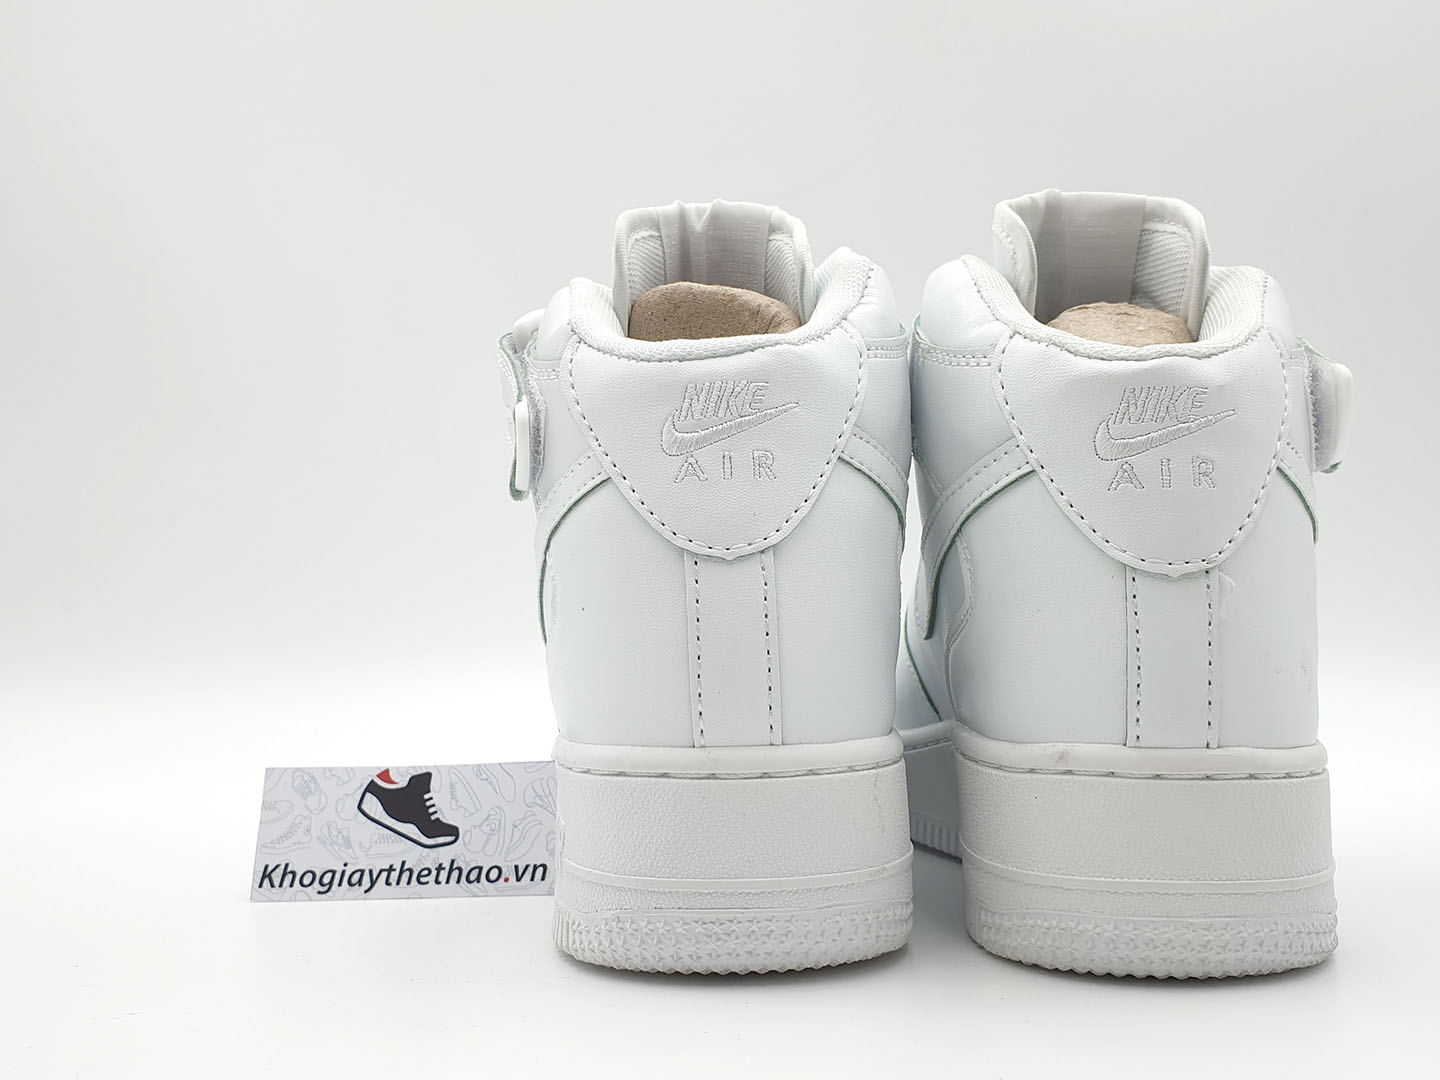 Giày Nike Air Force Cao Cổ Trắng (Af1 Mid) Rep 1:1 - Khogiaythethao